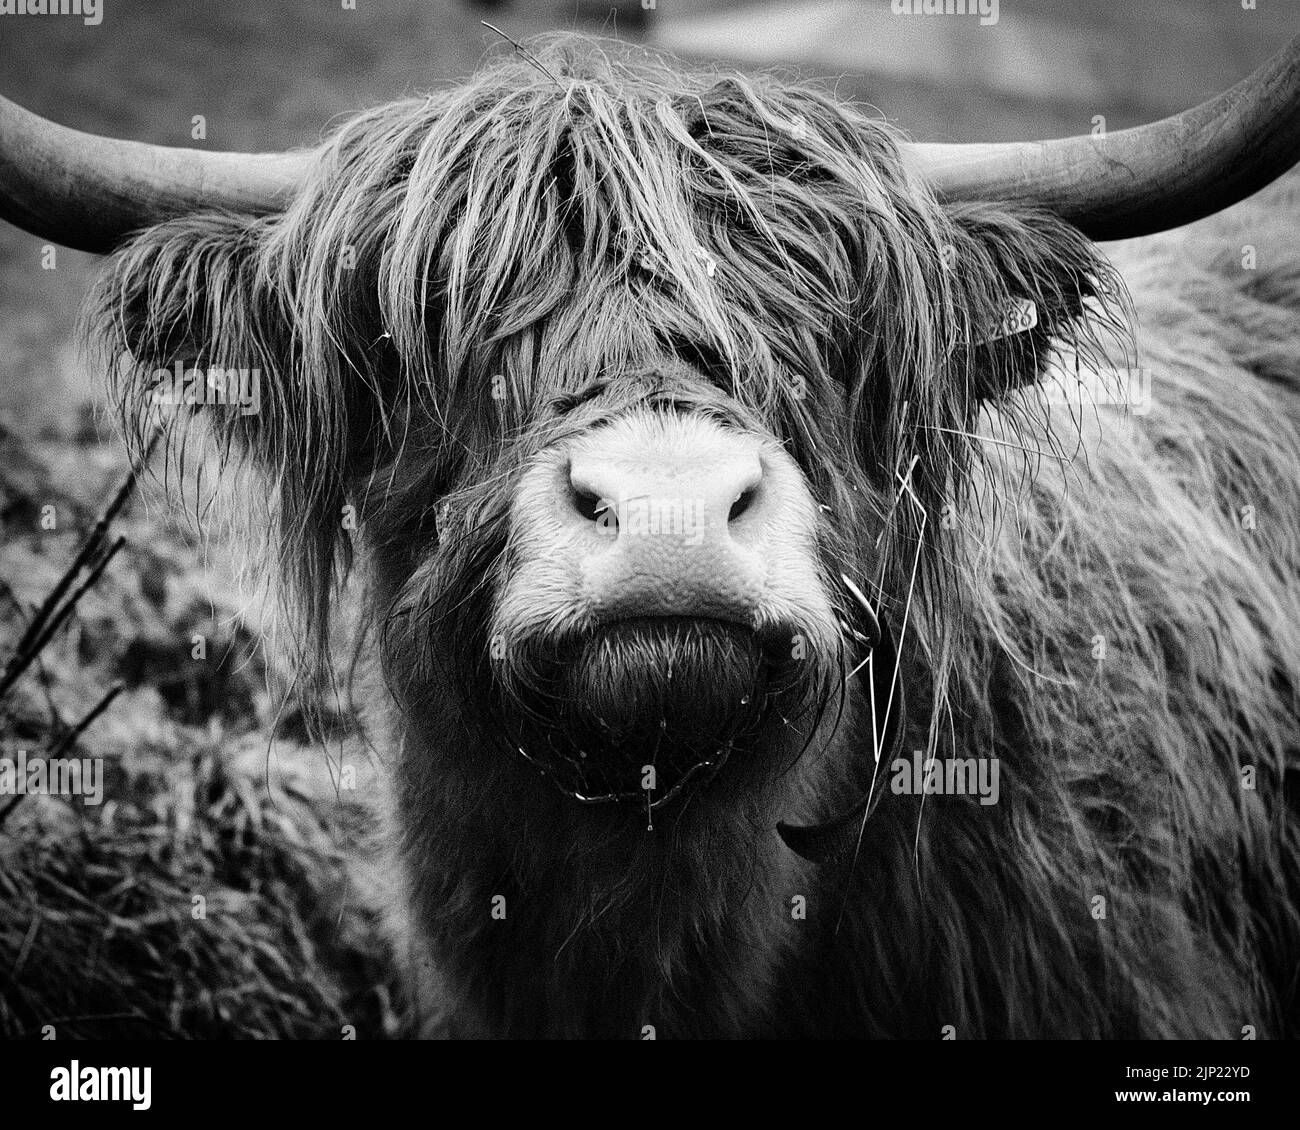 Close-up of a scottish highland cattle in monochrome, black and white Stock Photo